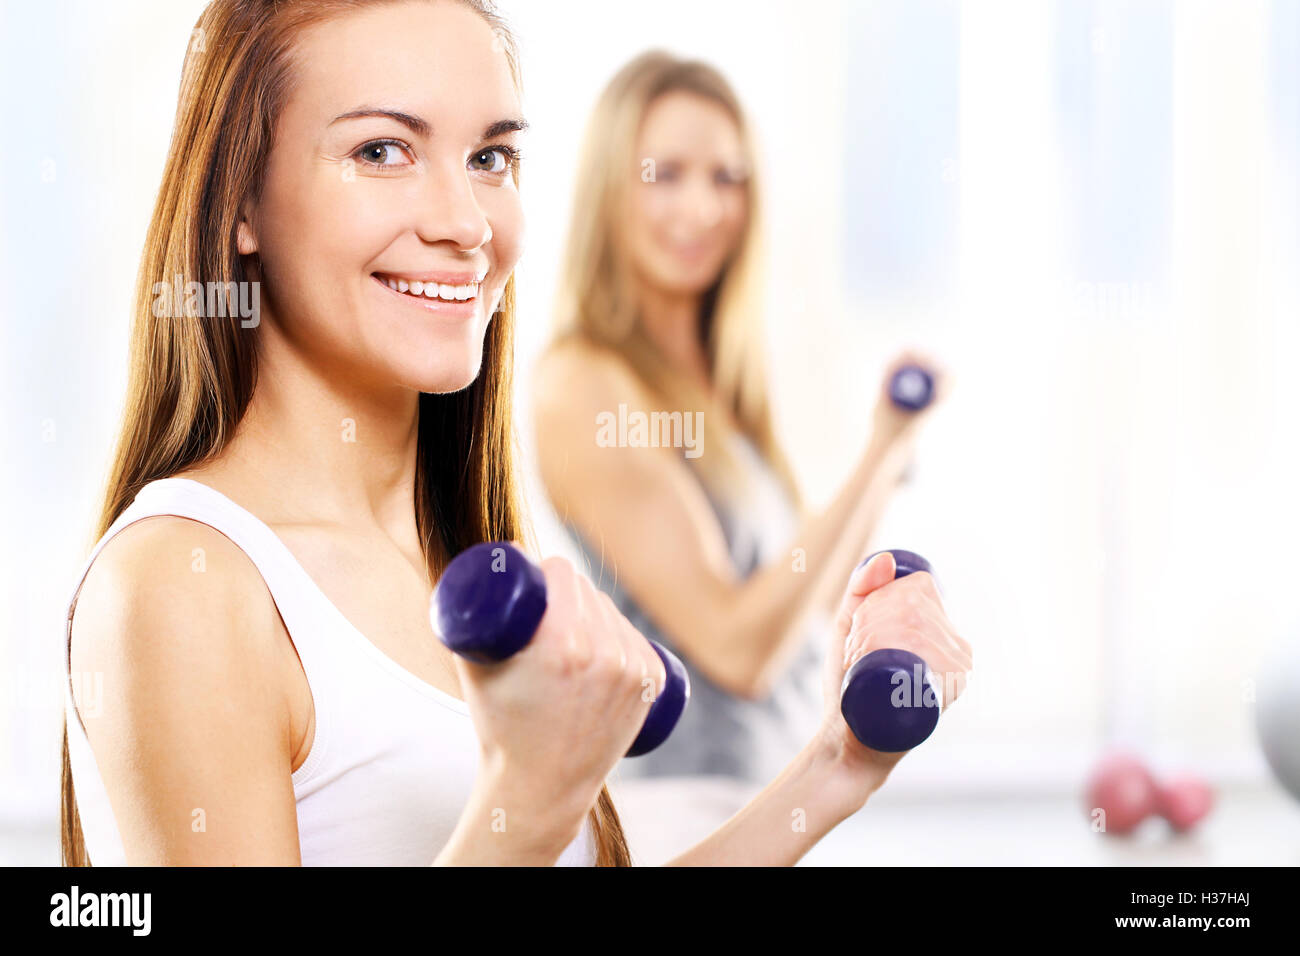 Training with weights, two young women in the gym Stock Photo